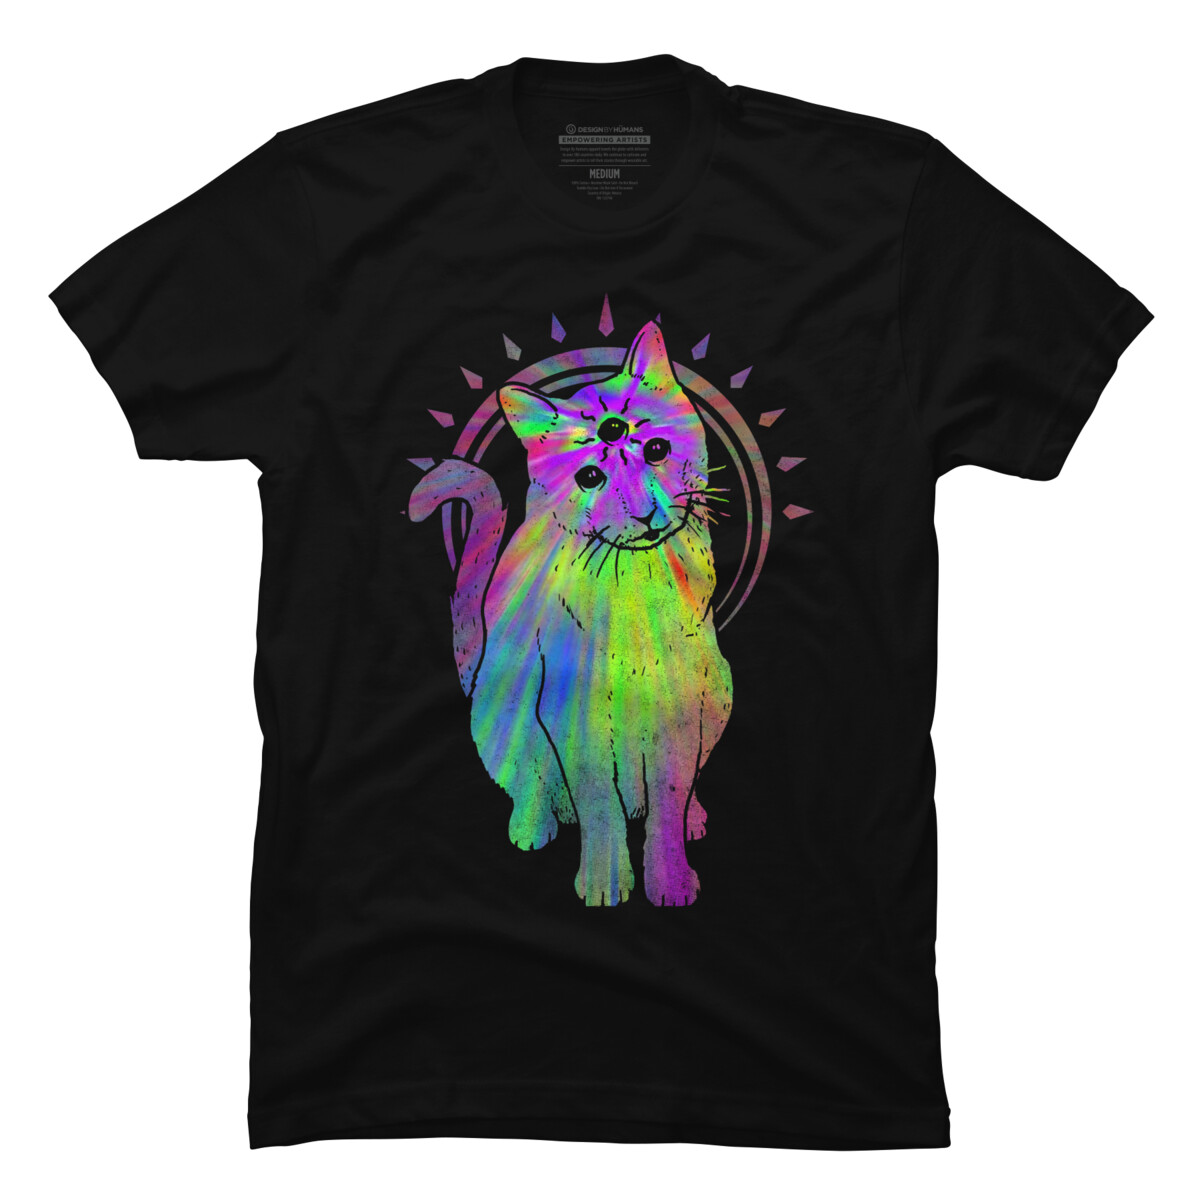 Psychic psychedelic trippy cat Mens Black Graphic Tee - Design By Humans  S - image 1 of 4